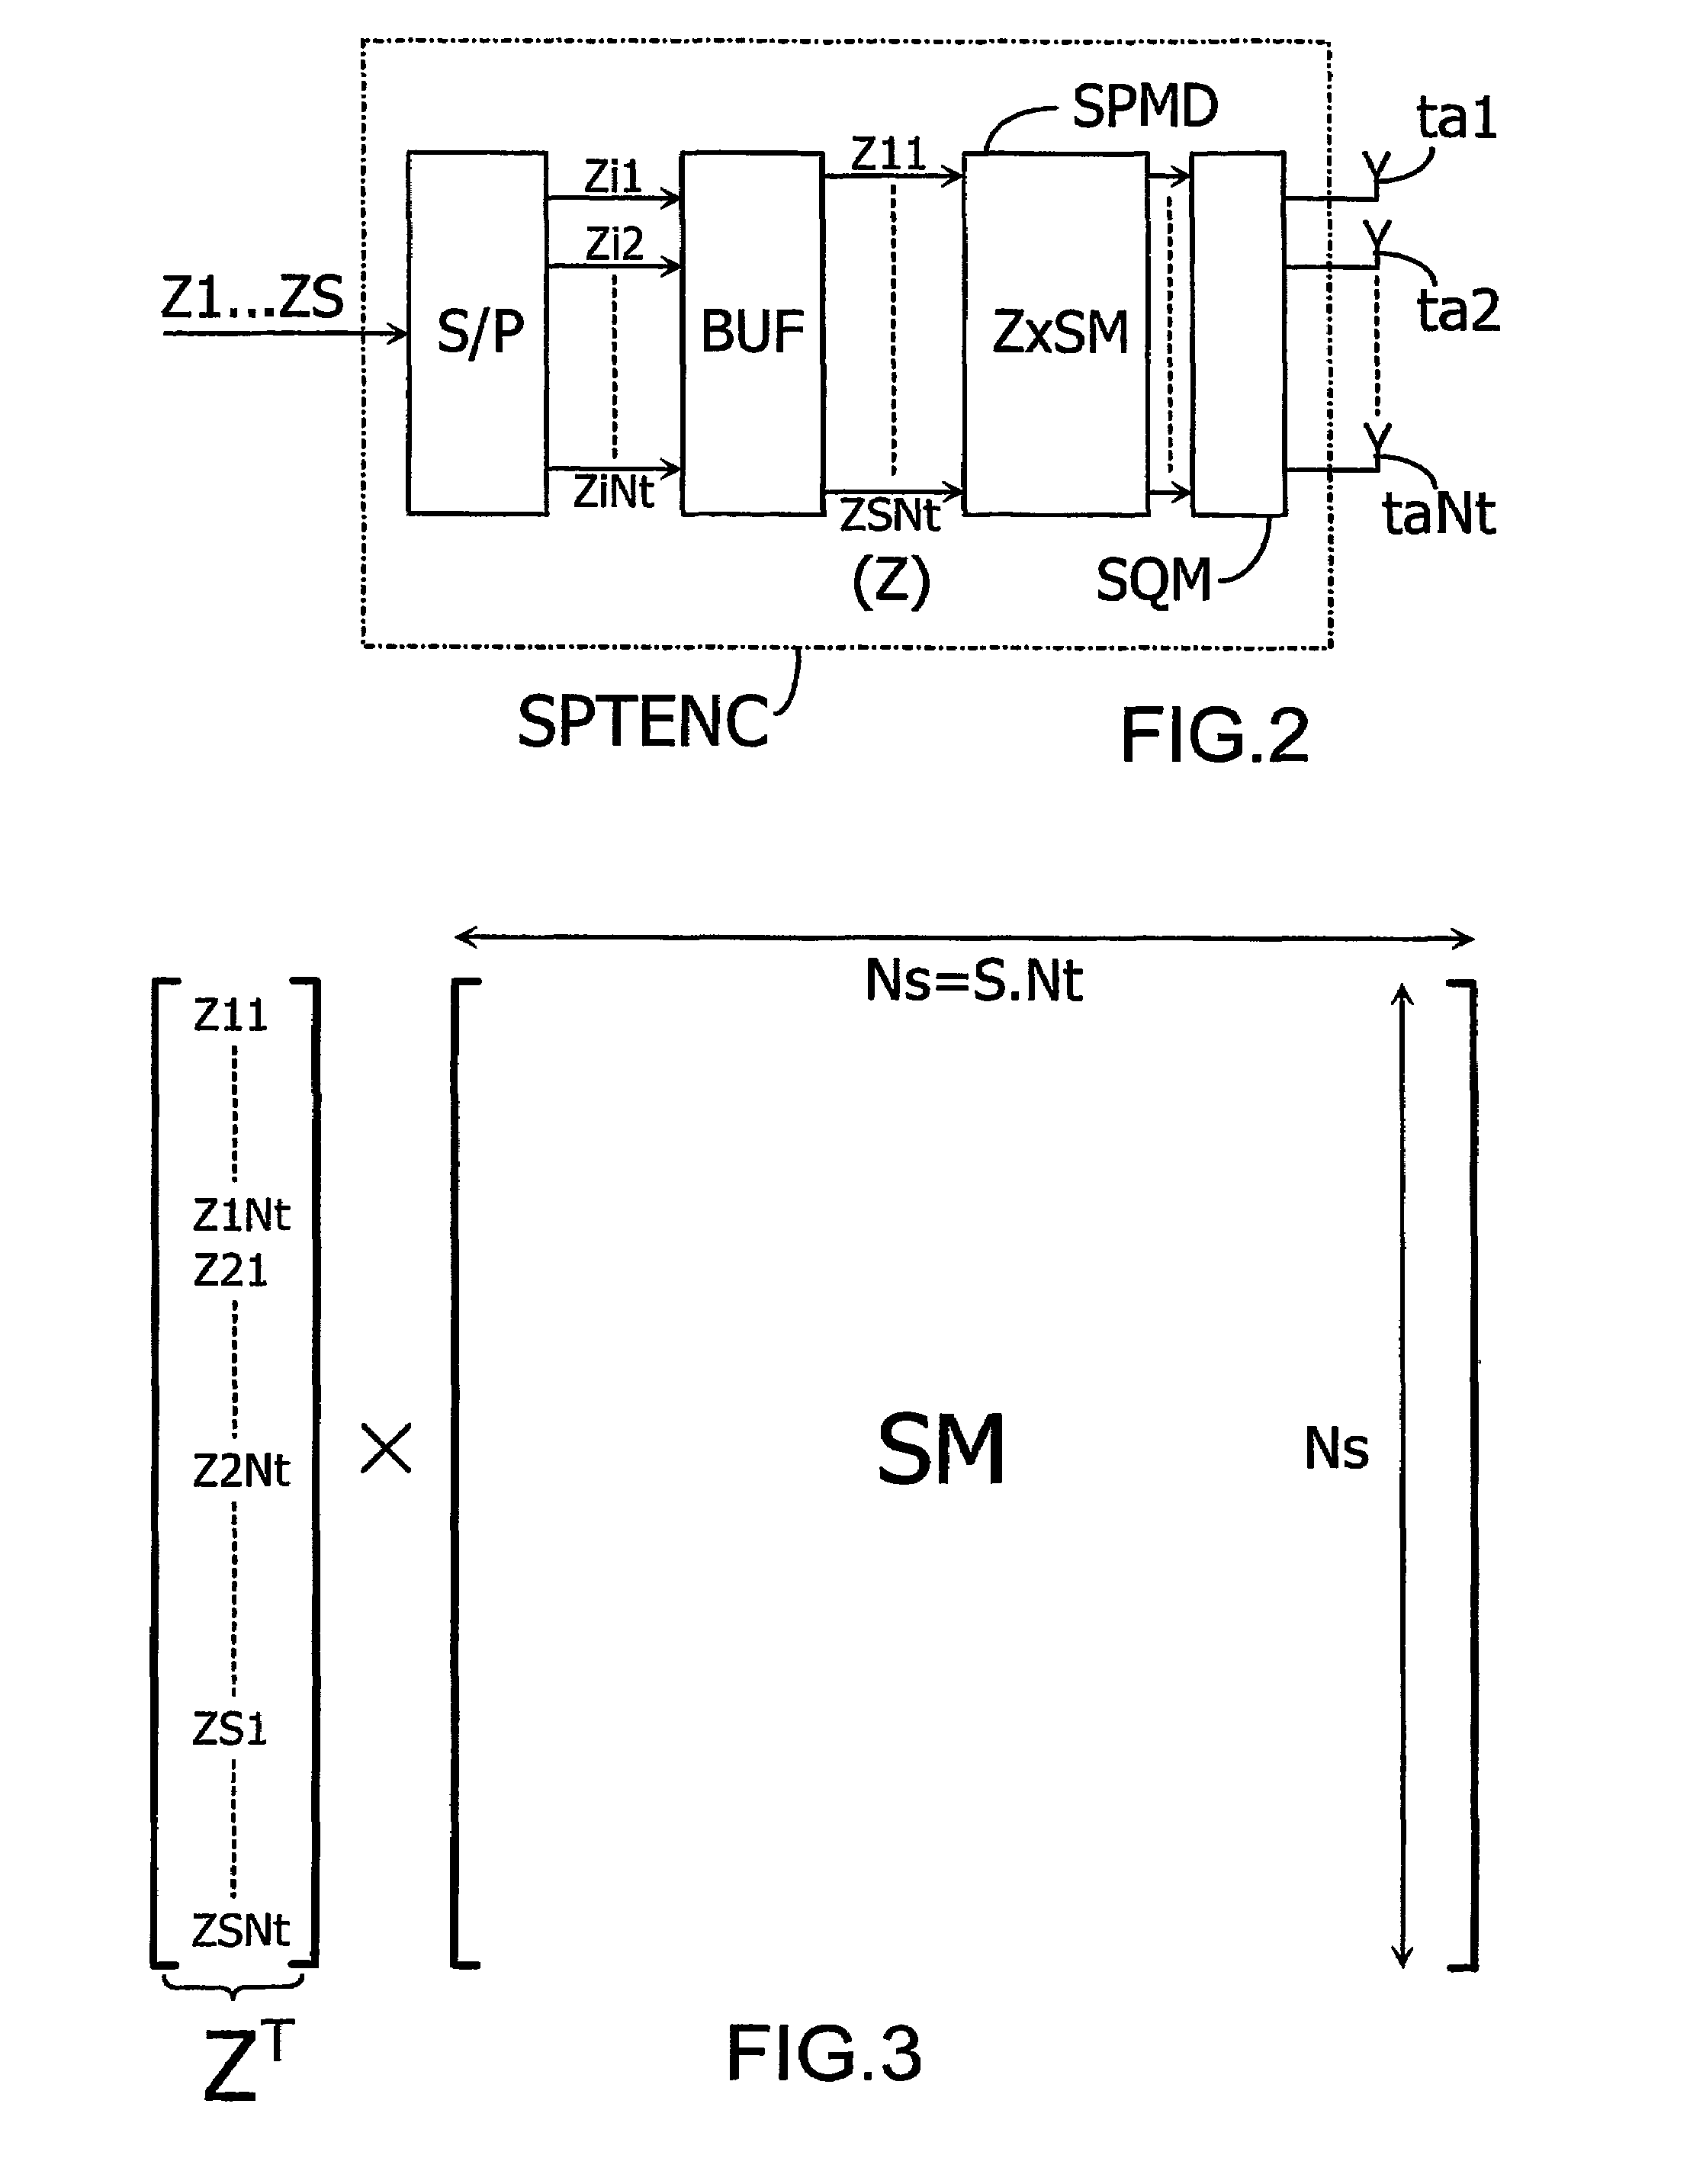 Method for transmitting data in a MIMO telecommunication system offering a high diversity as perceived from a receiver end